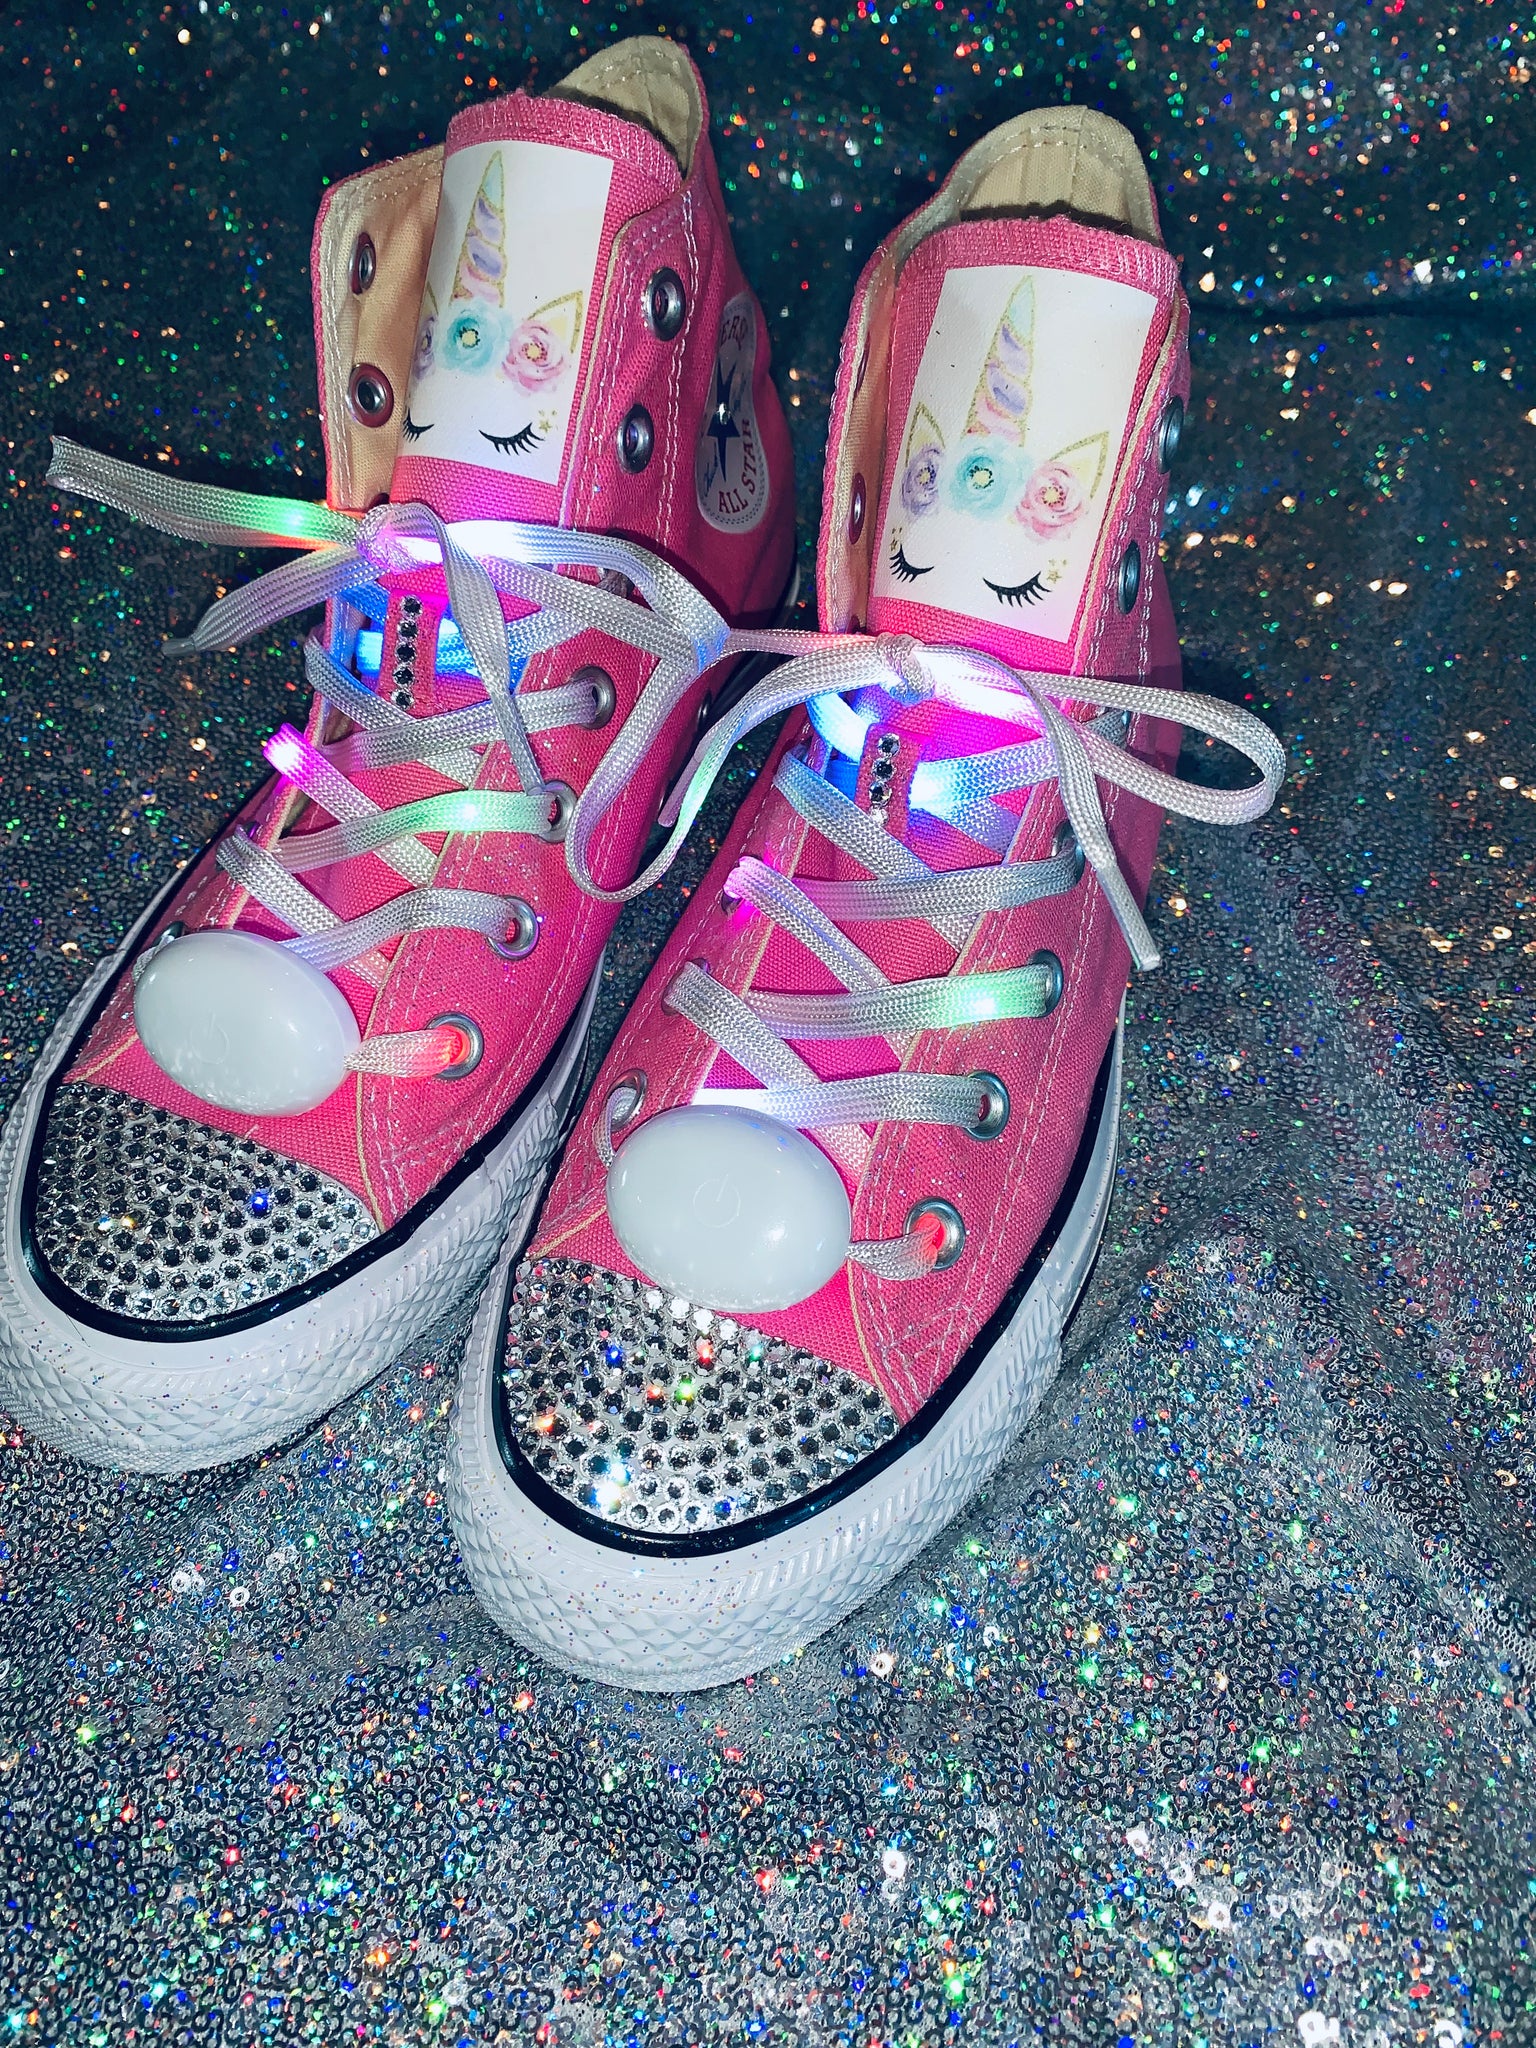 converse light up sneakers